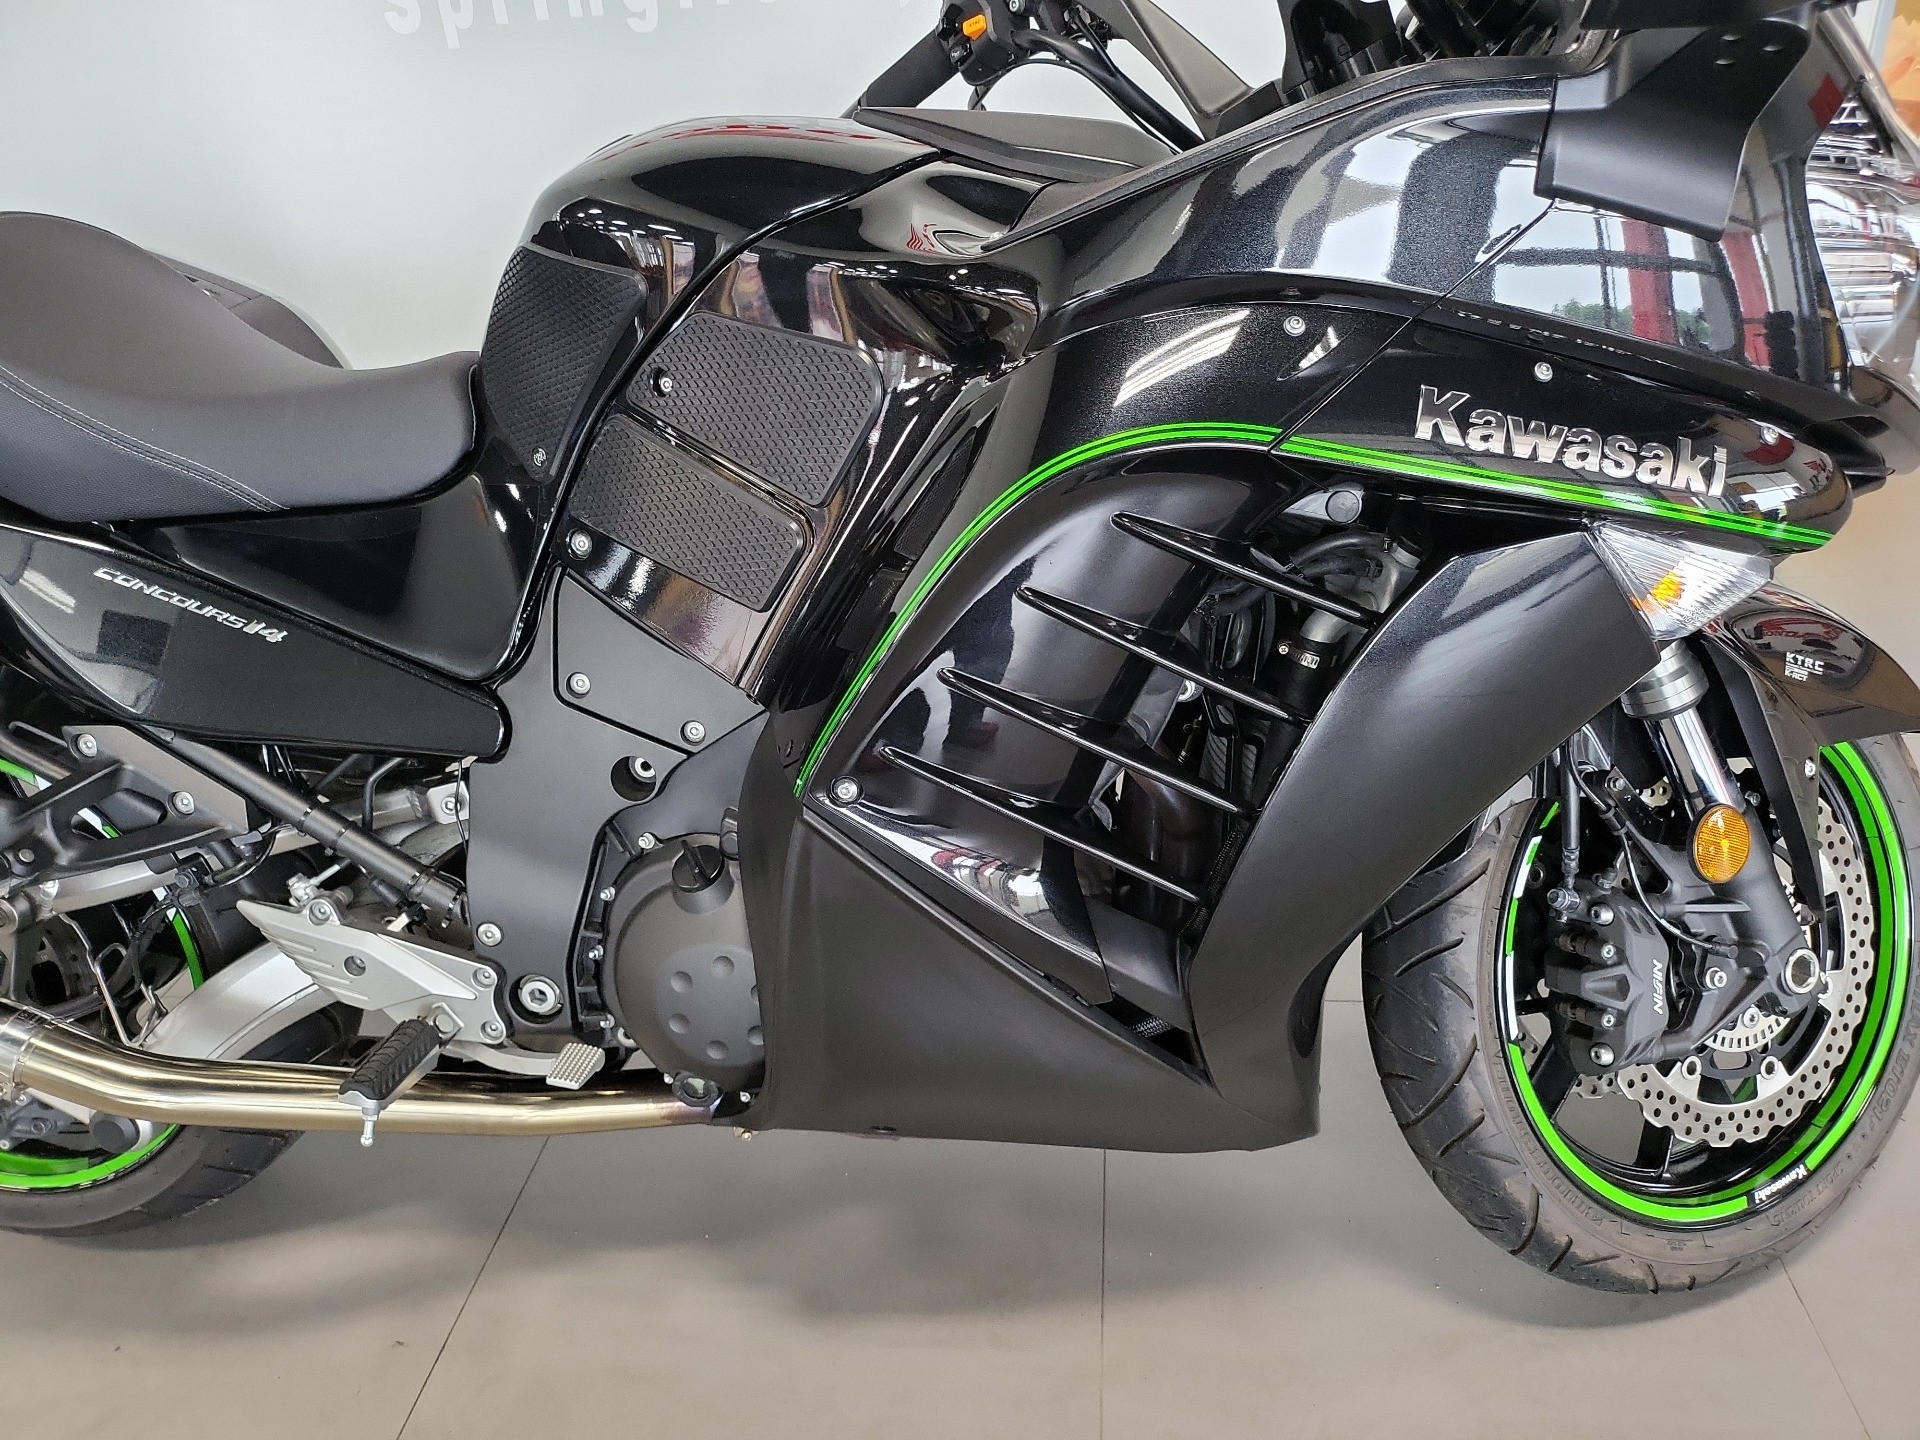 Used 2021 Kawasaki Concours 14 ABS Motorcycles in Springfield, MO 